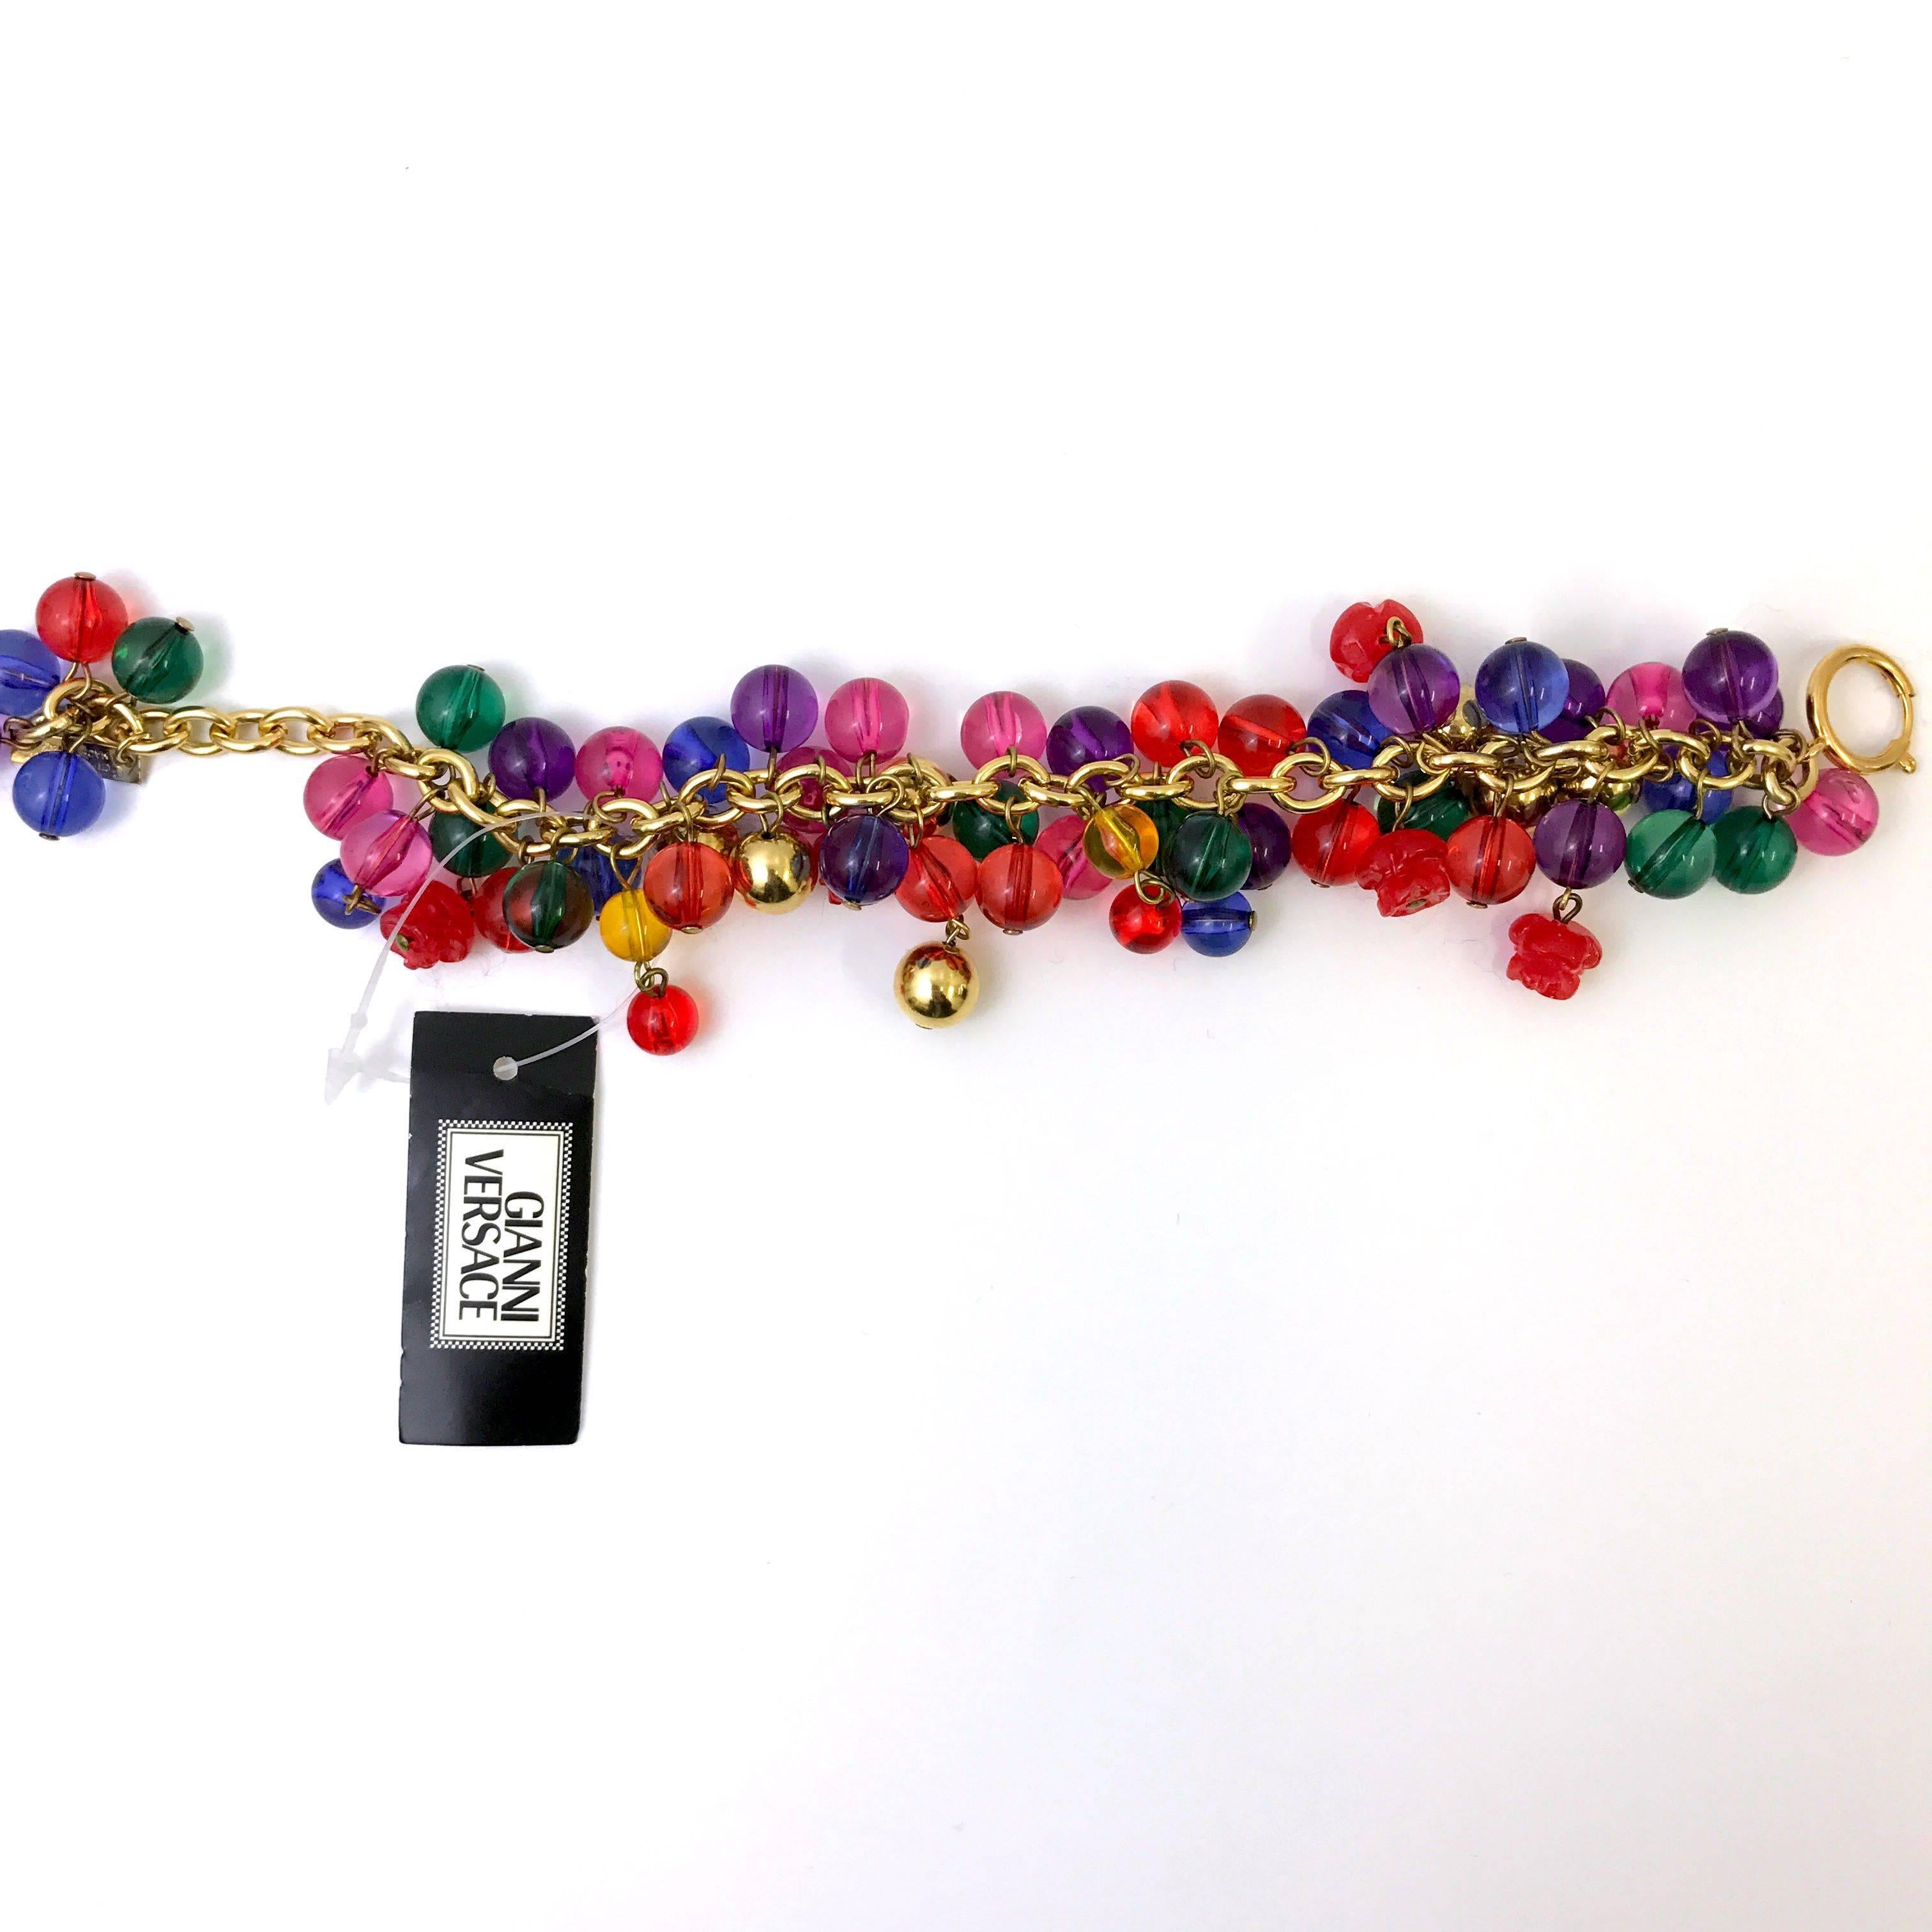 This bracelet features a multicoloured cluster of vibrant glass beads. The designer Gianni Versace captures his iconic colourful designs in this piece. Each coloured bead is hanging from the gilded gold tone metal chain. Stamped with his Gianni